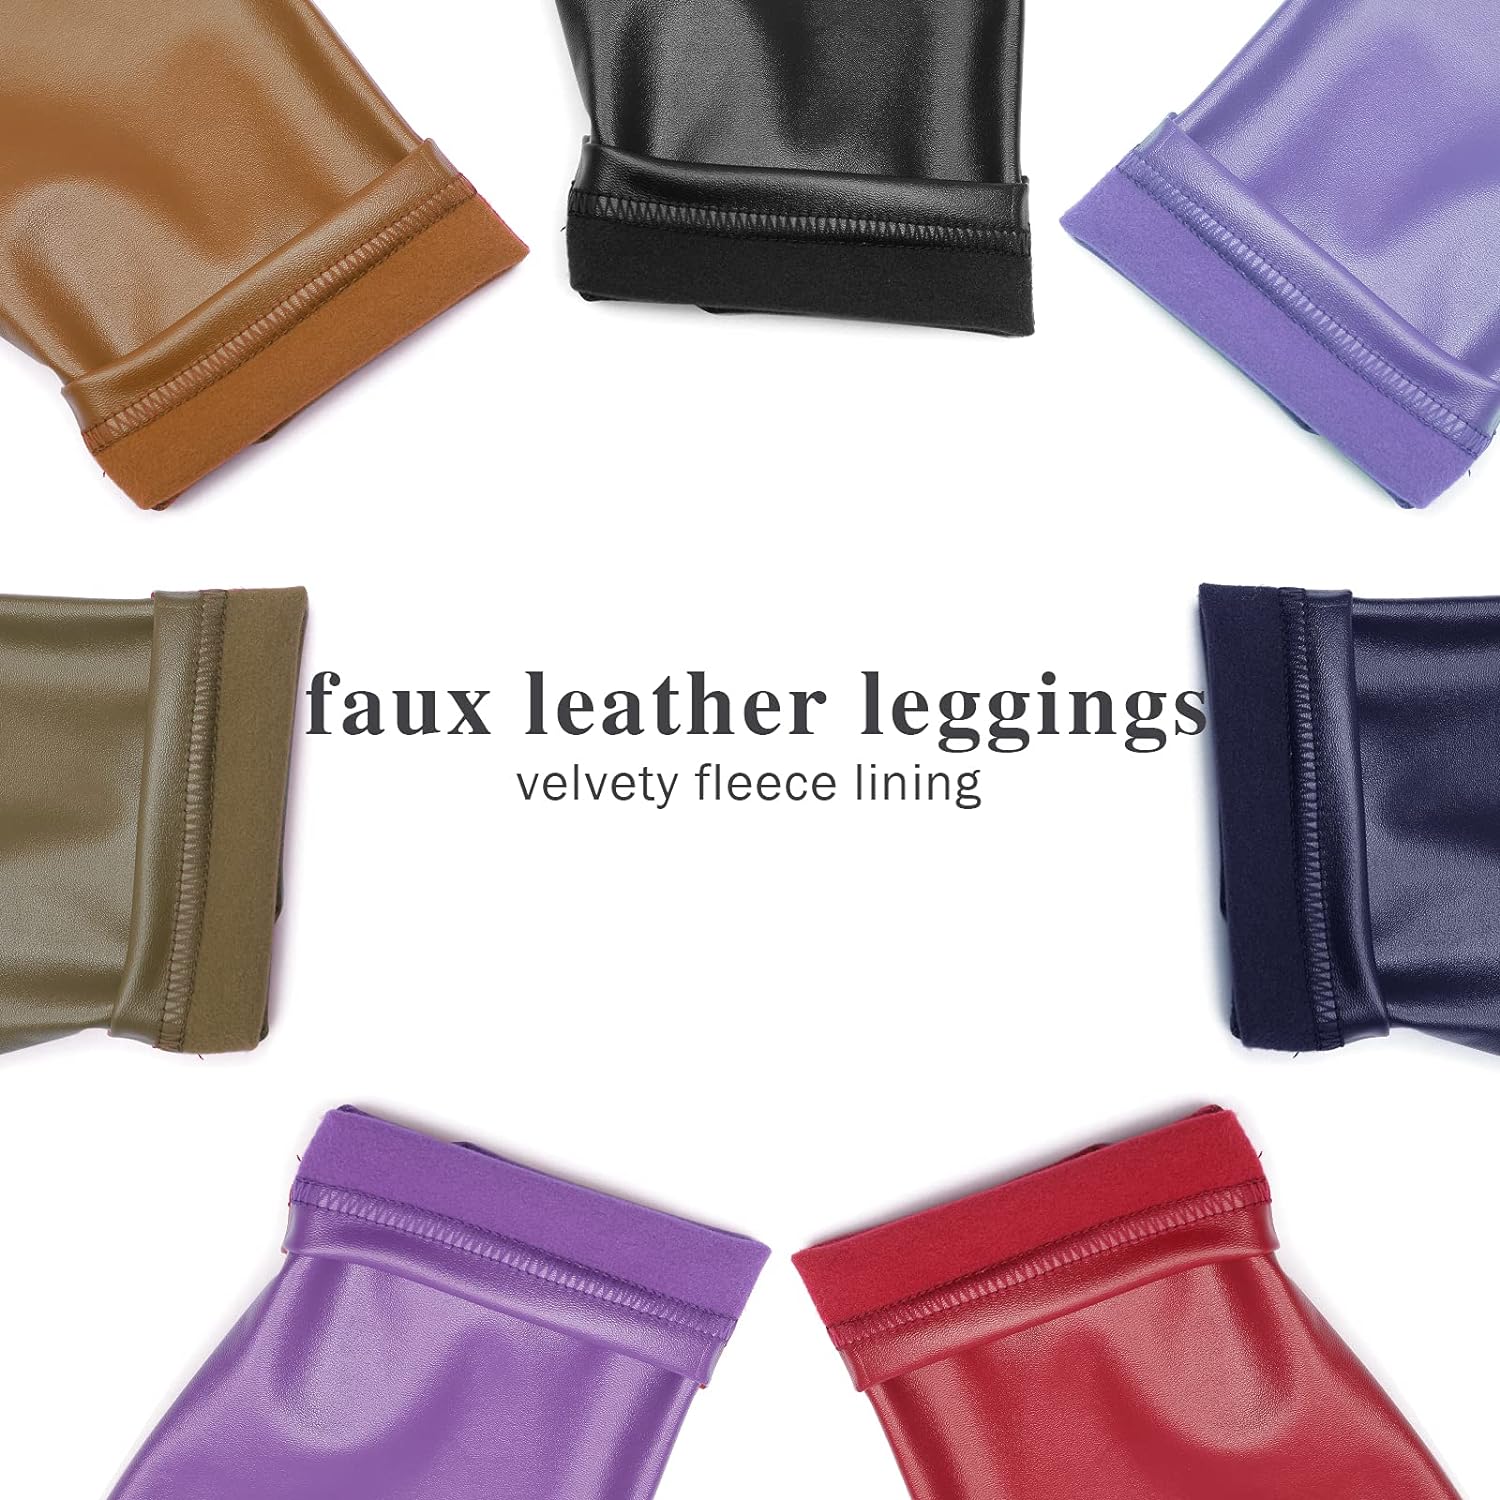 Ginasy Faux Leather Leggings for Women Tummy Control Stretch High Waist Pleather Pants with Thin Fleece Lined